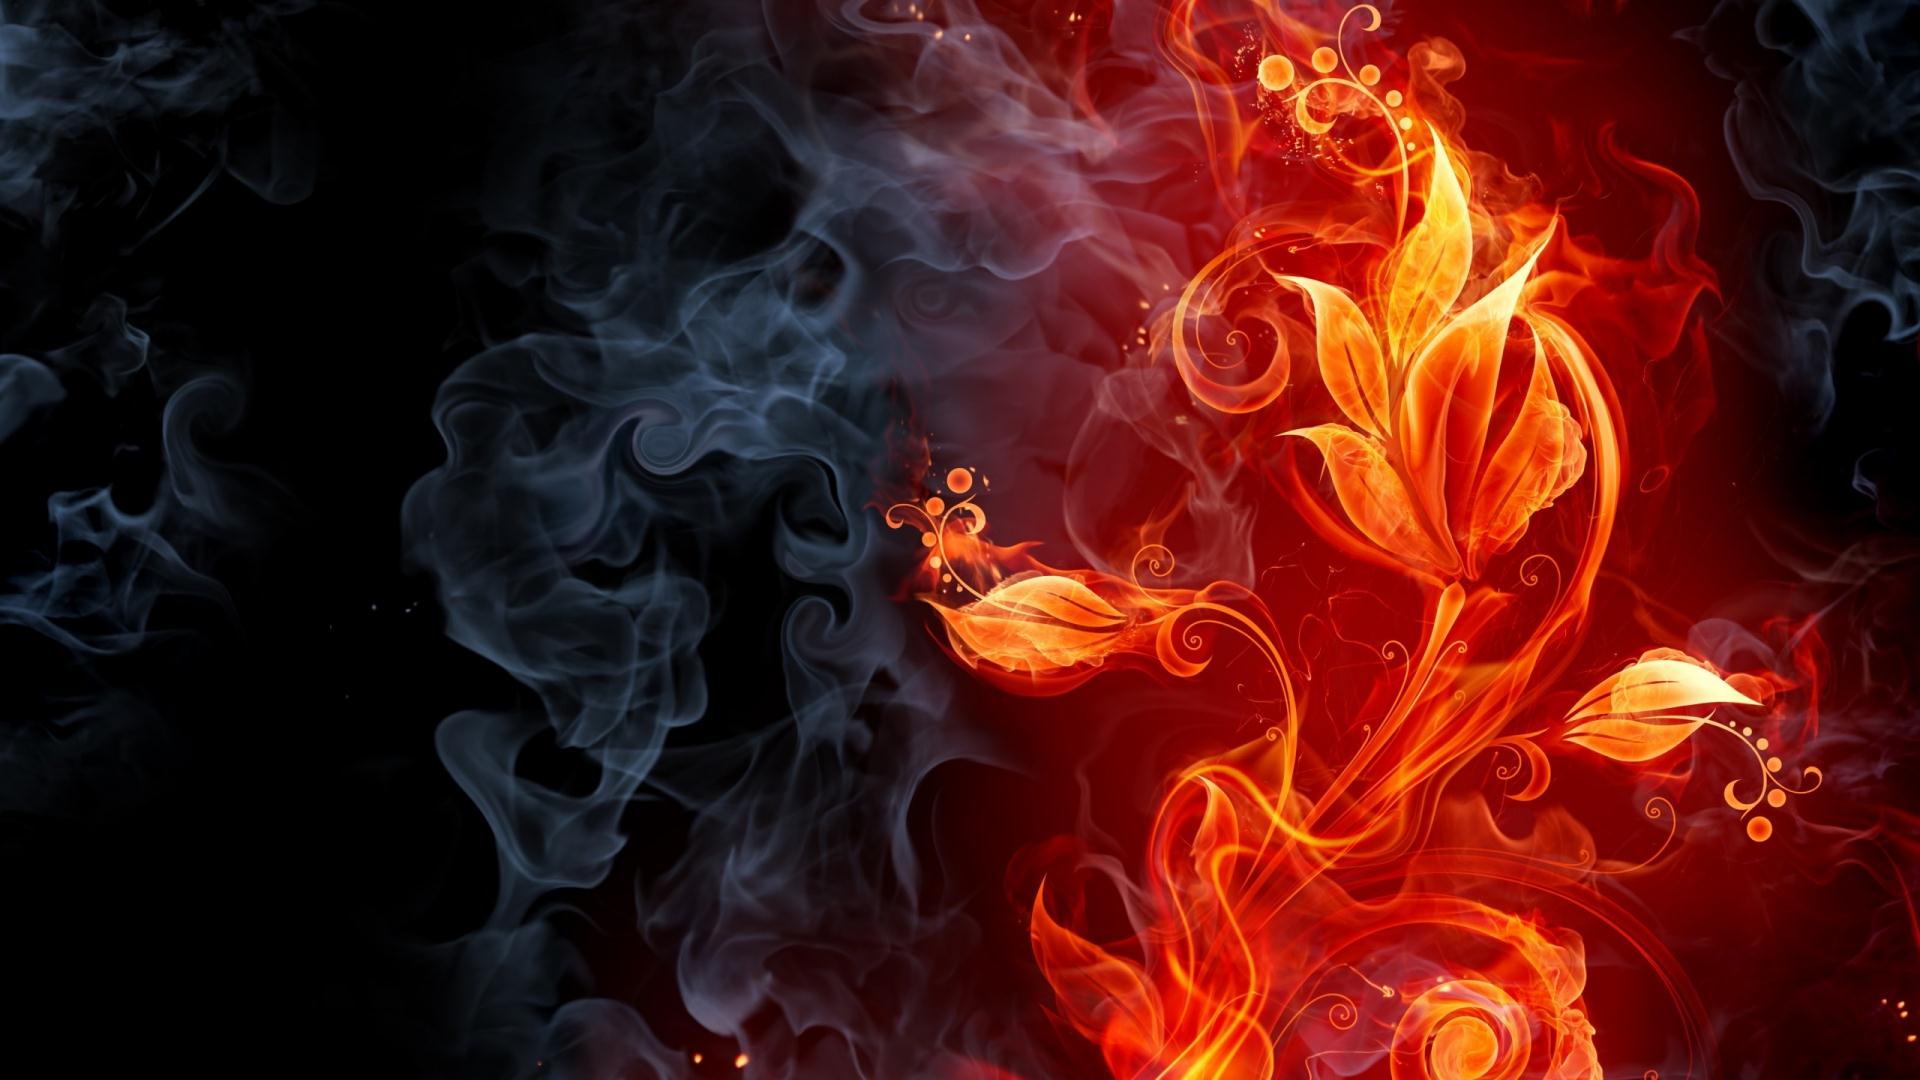 Fire Wallpapers For Free Download Wallpaper Wallpaperyup.com